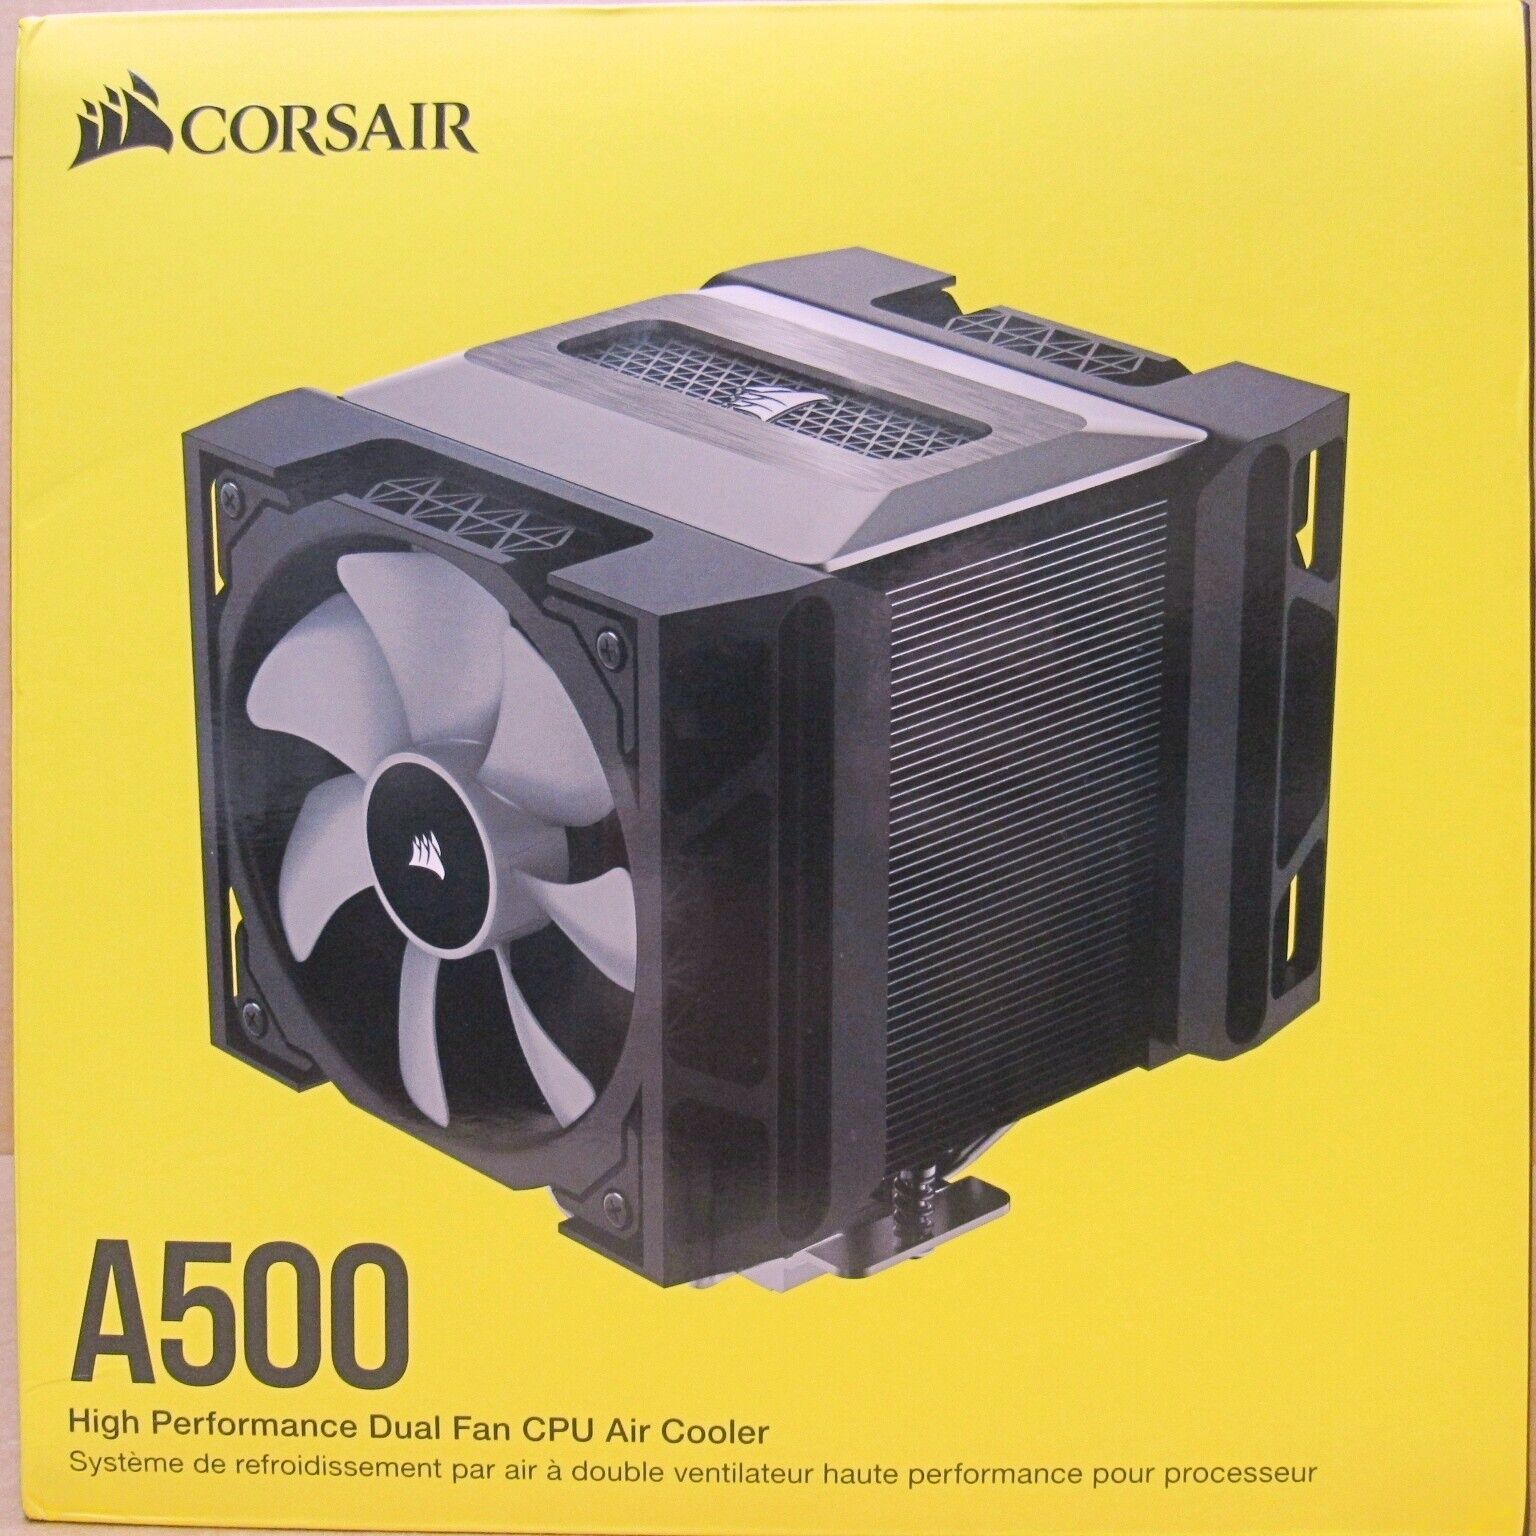 New Corsair A500 (Dual Fan) CPU Cooler (New-In-The-Box Unit)